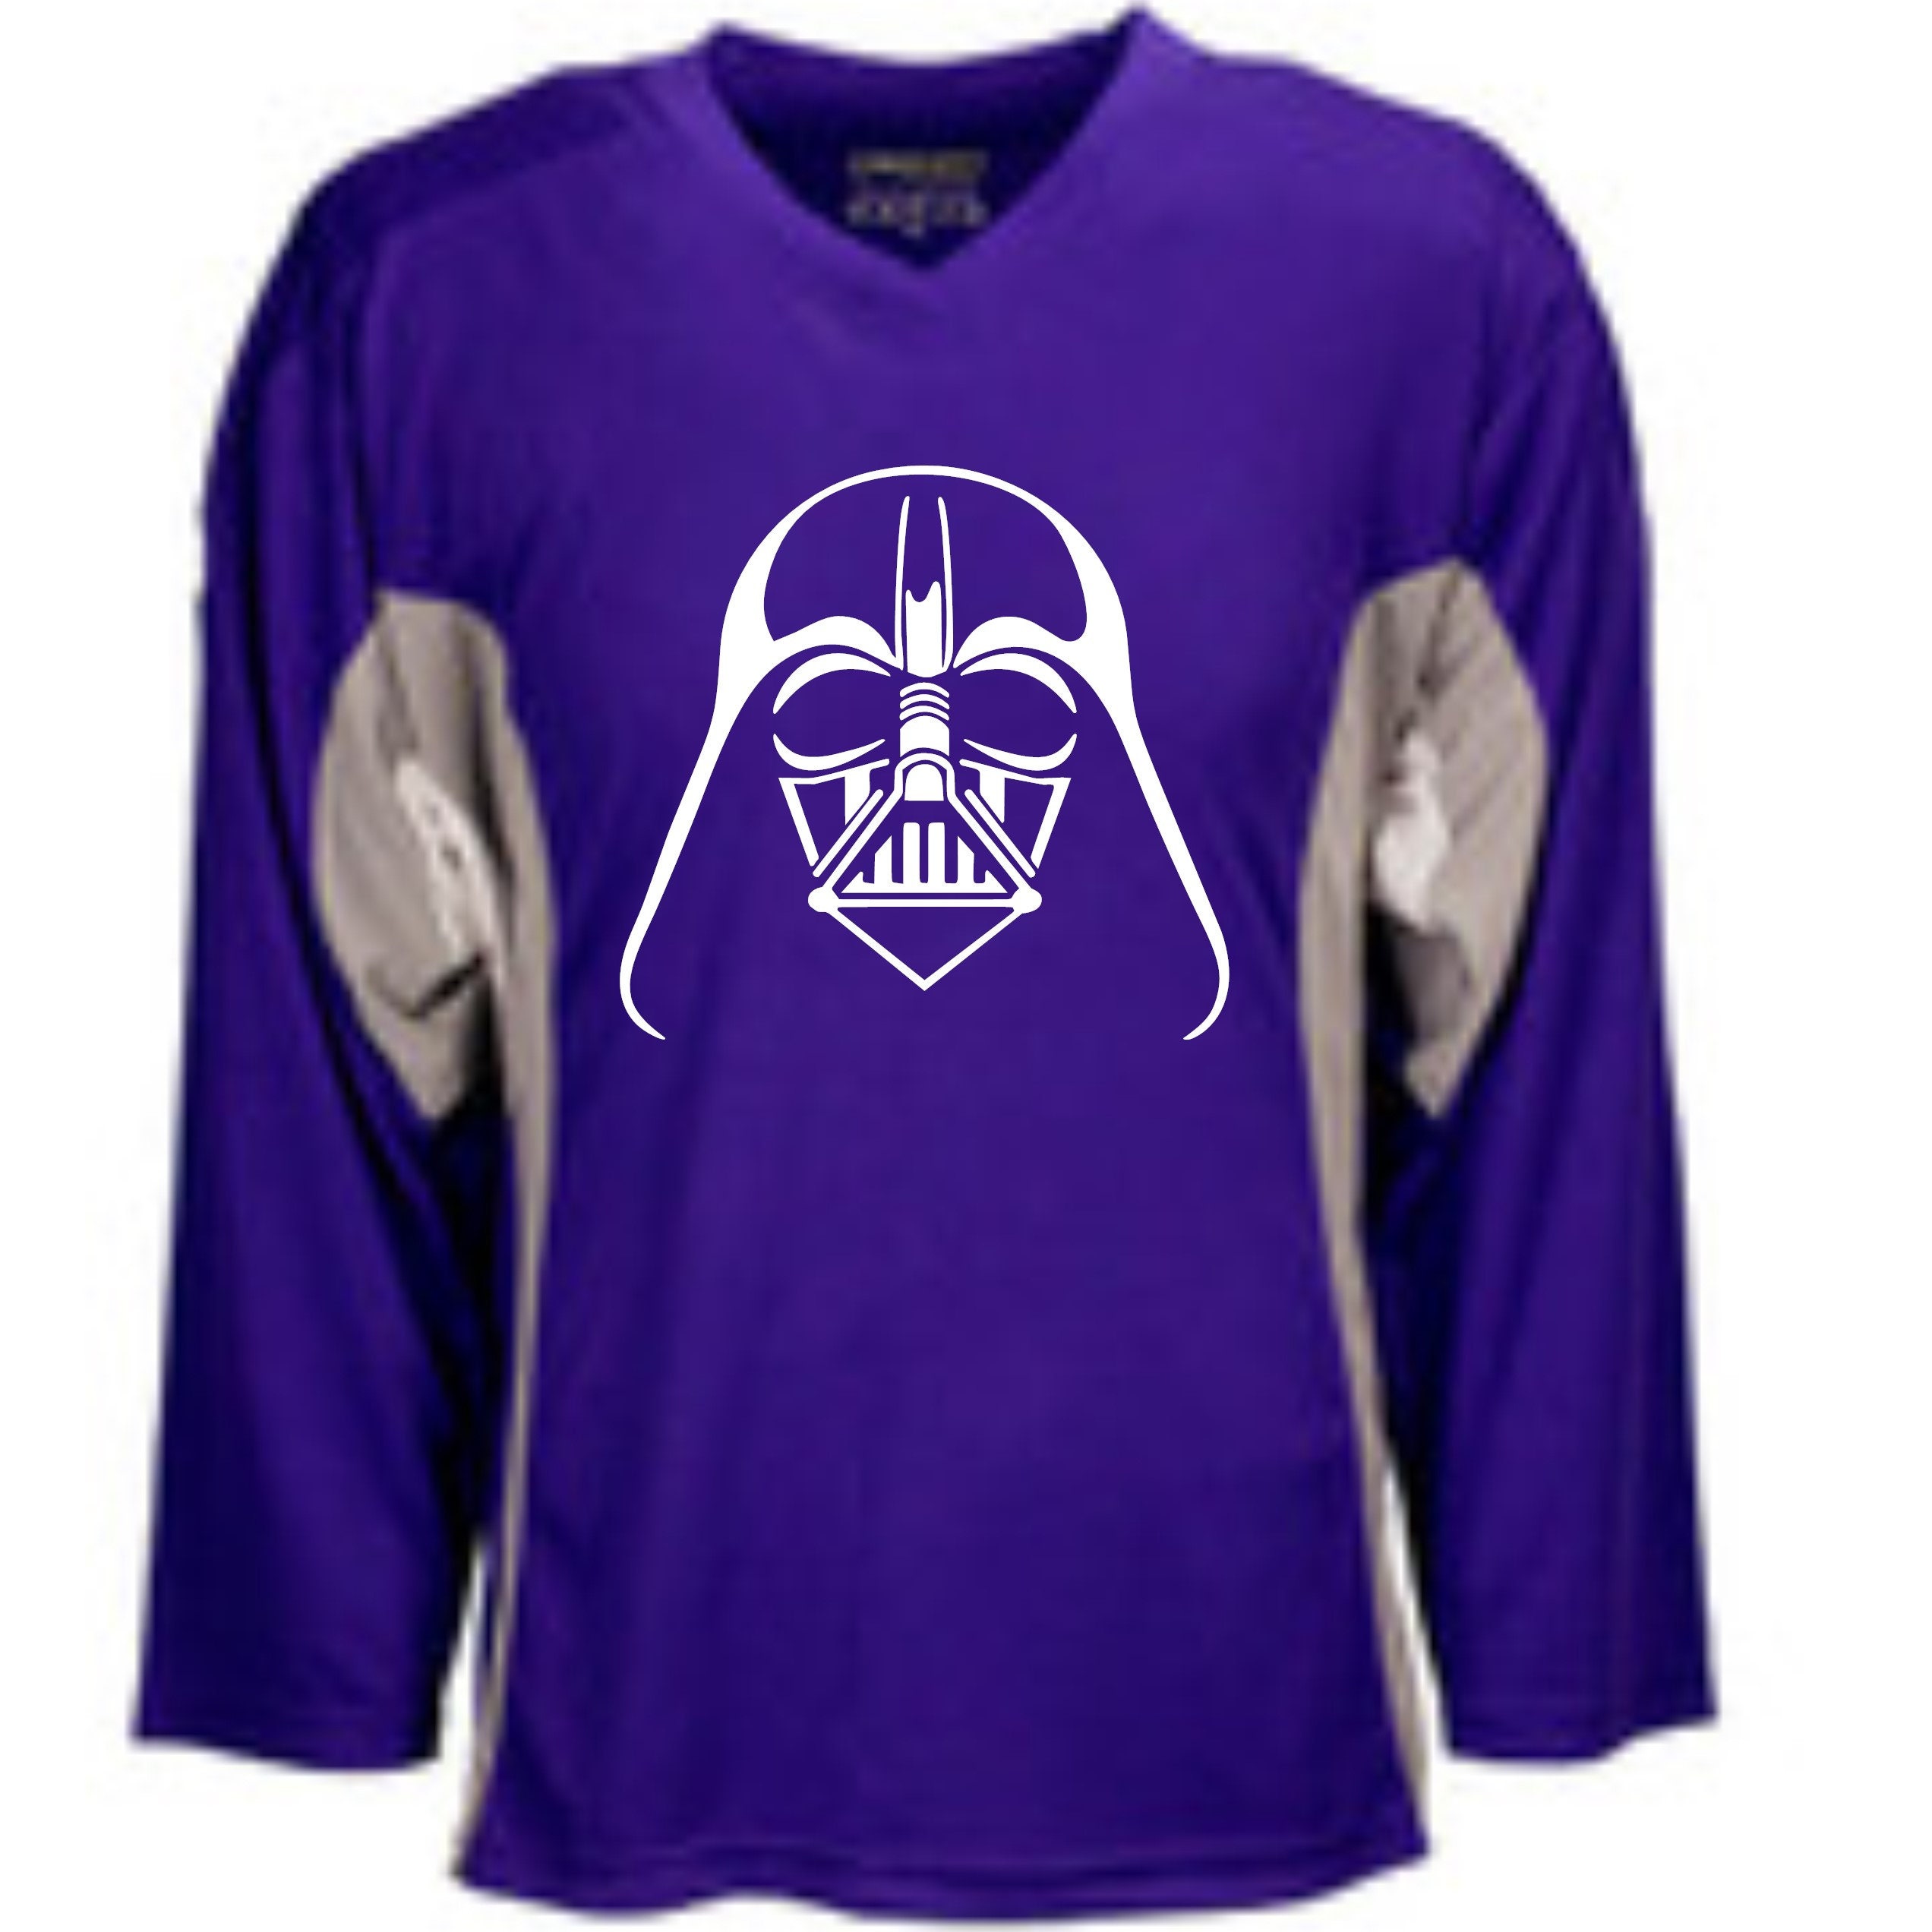 Darth Vader Star Wars Graphic Hockey Jersey w/Number on back CLOSEOUT 